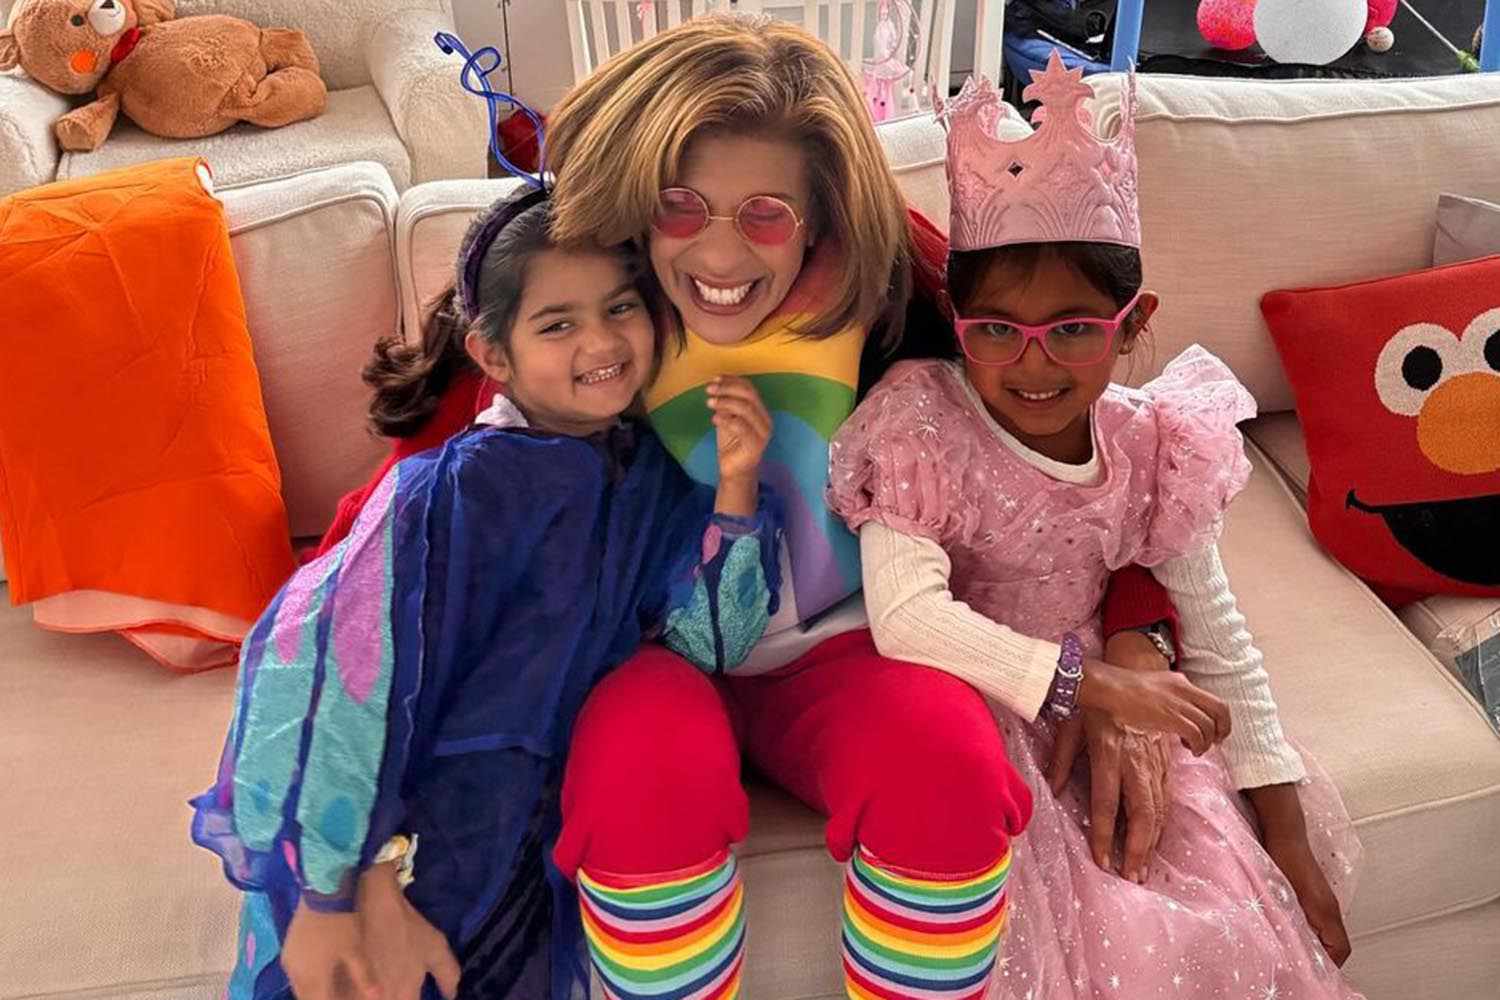 Hoda Kotb Shares Her Trick for Coping with Being Away from Her Daughters as She Leaves for Paris Olympics